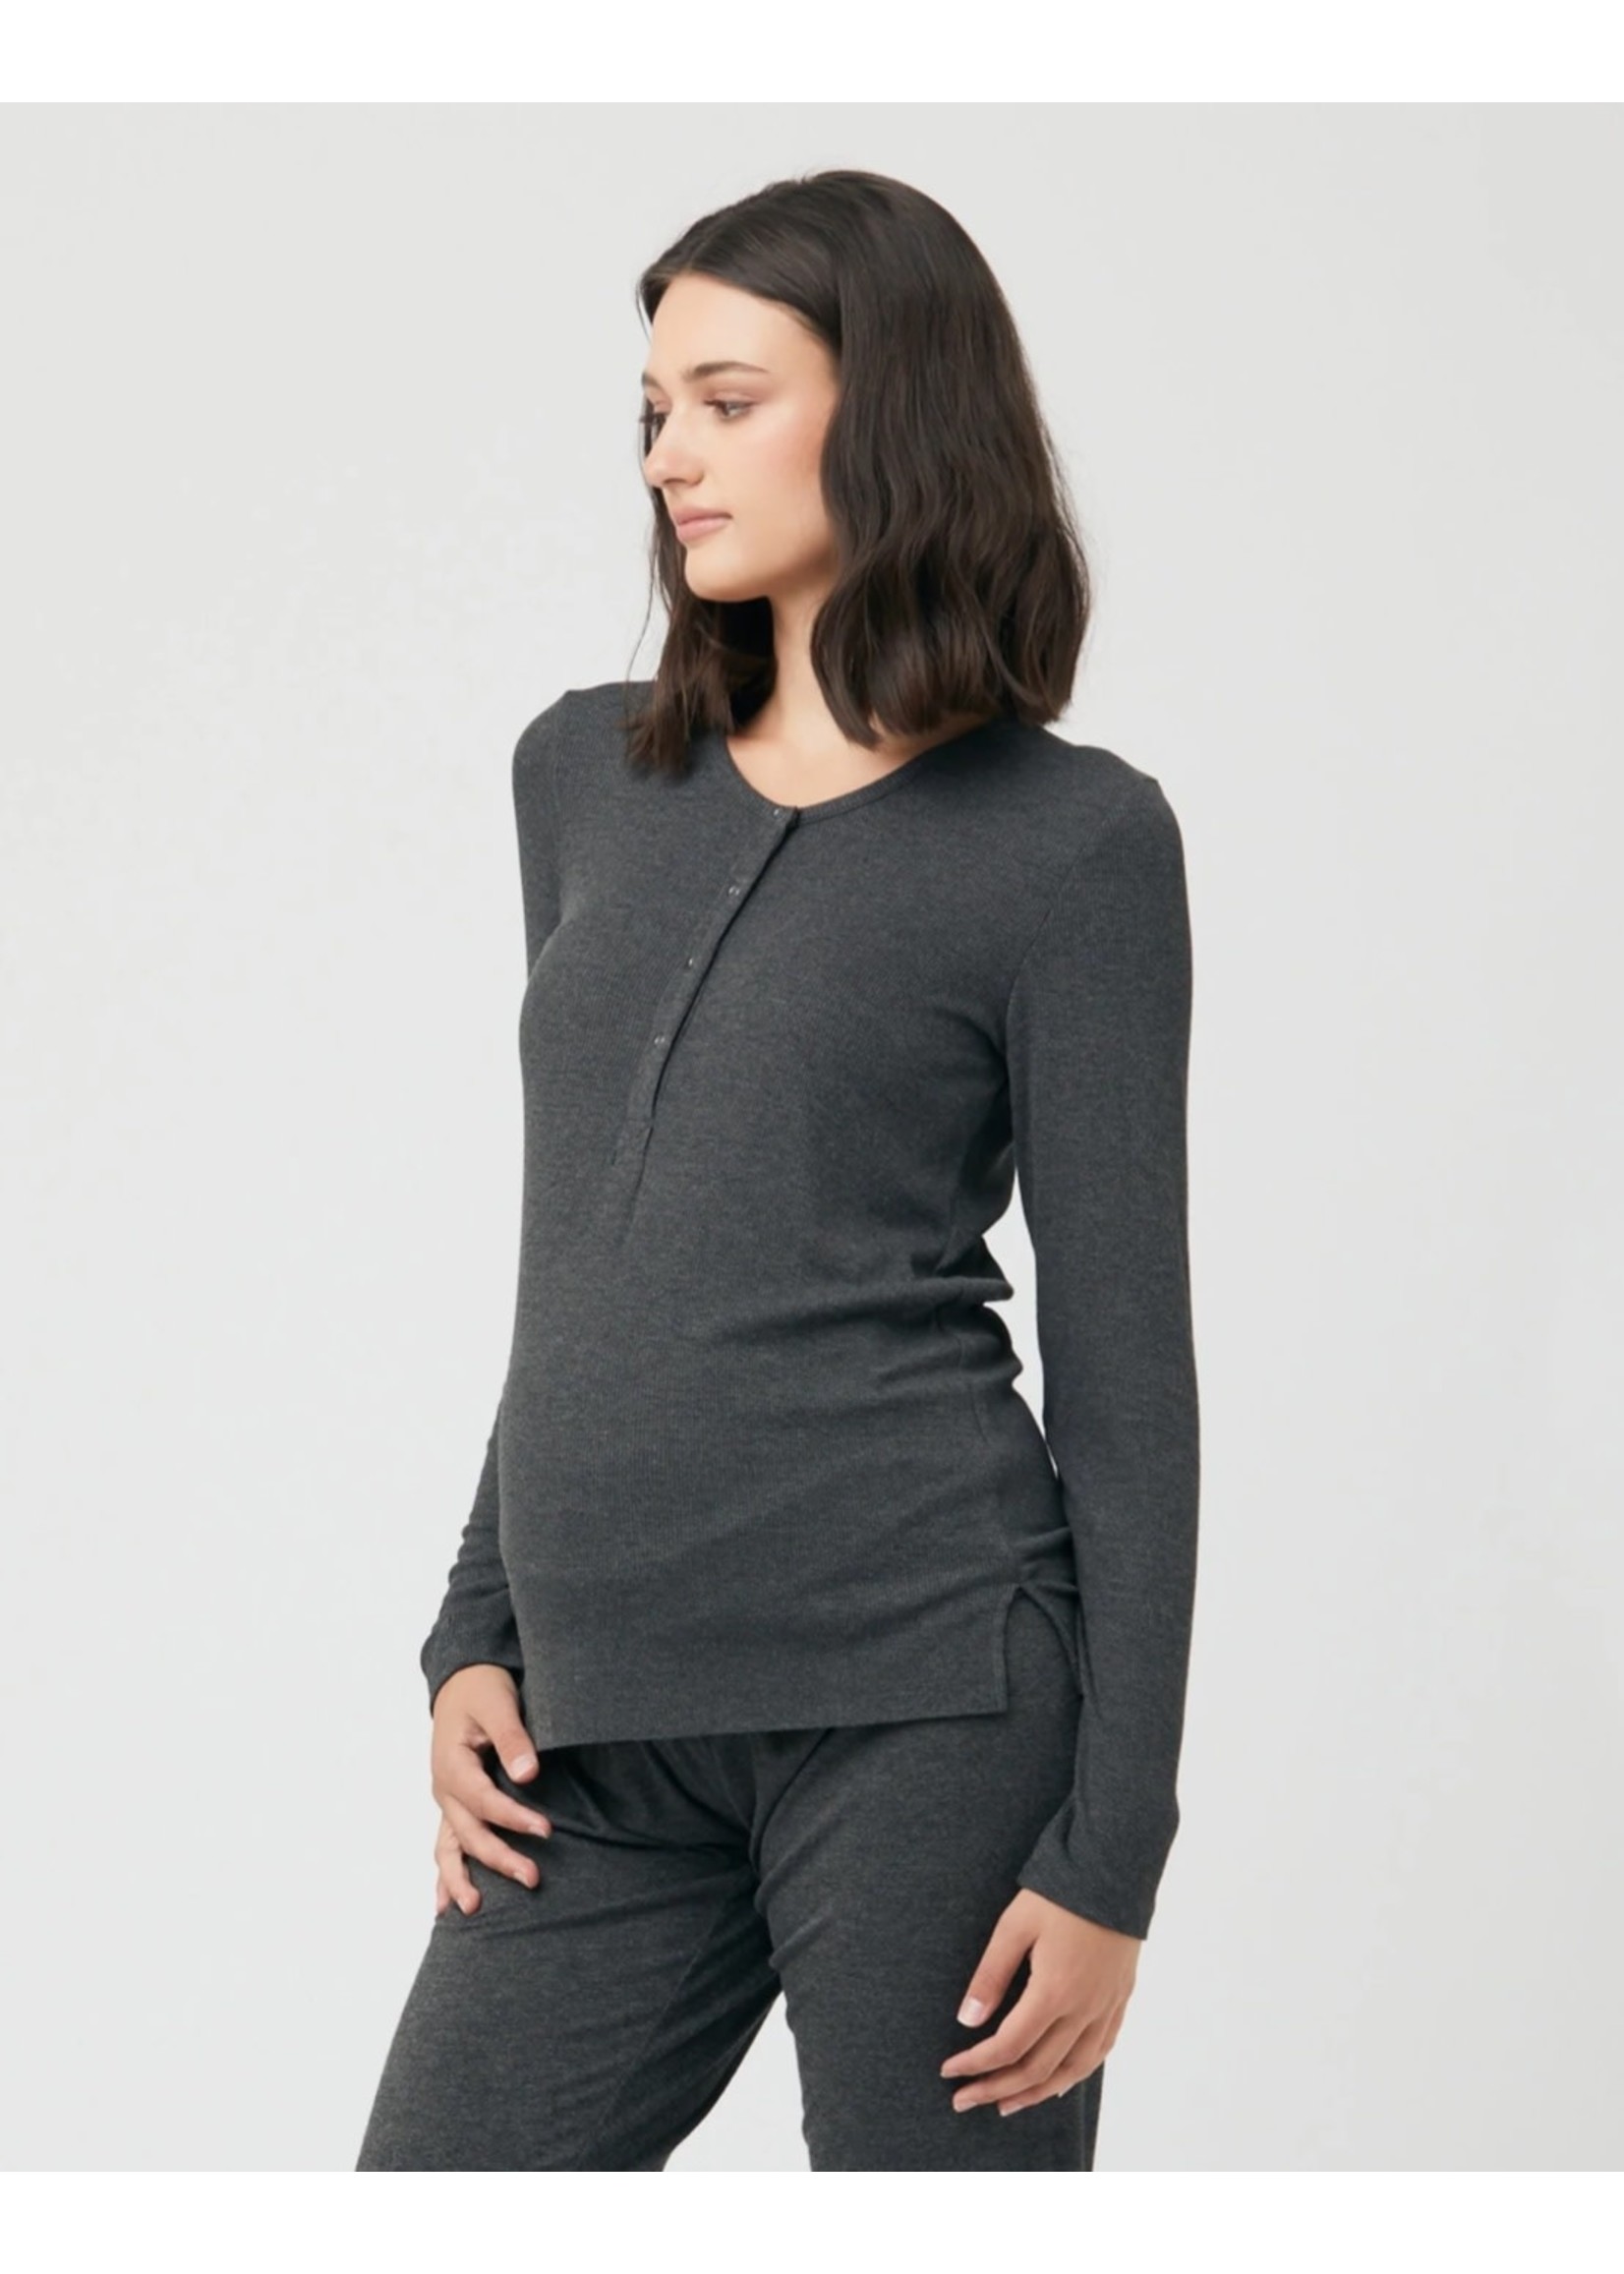 Ripe Maternity Ripe Maternity, Rib Button Through Top in Charcoal Marle